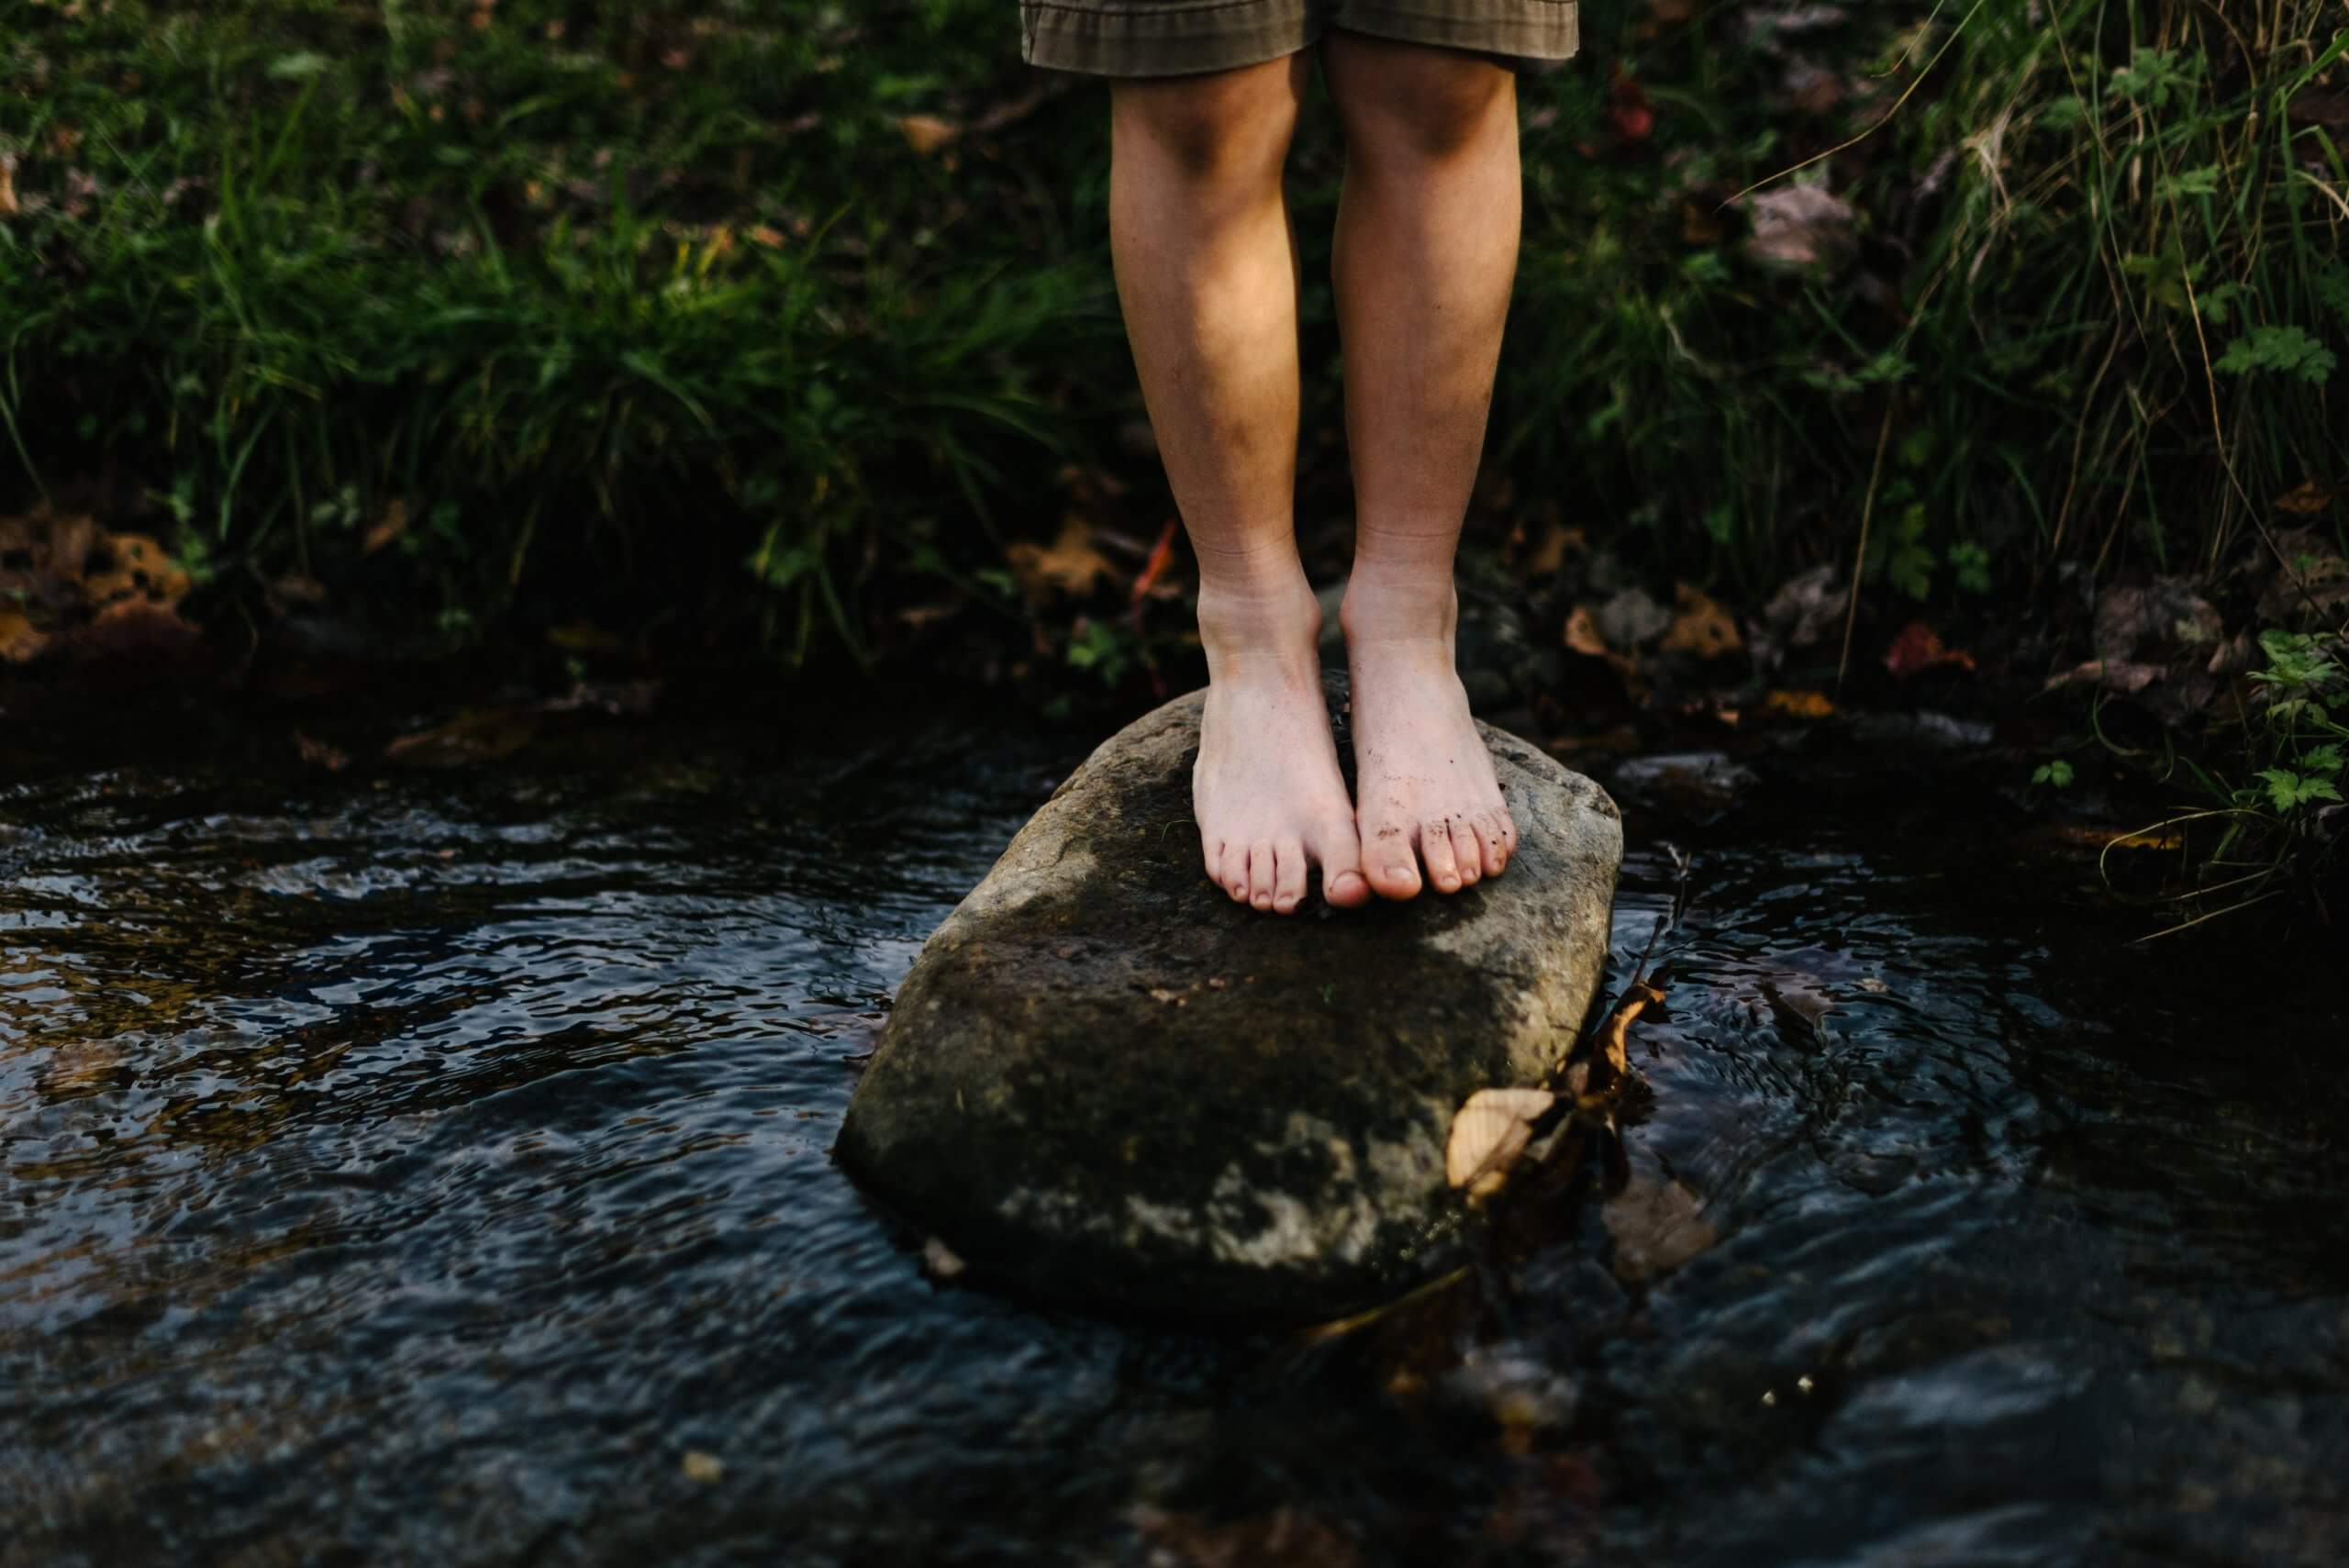 Earthing barefeet in a stream